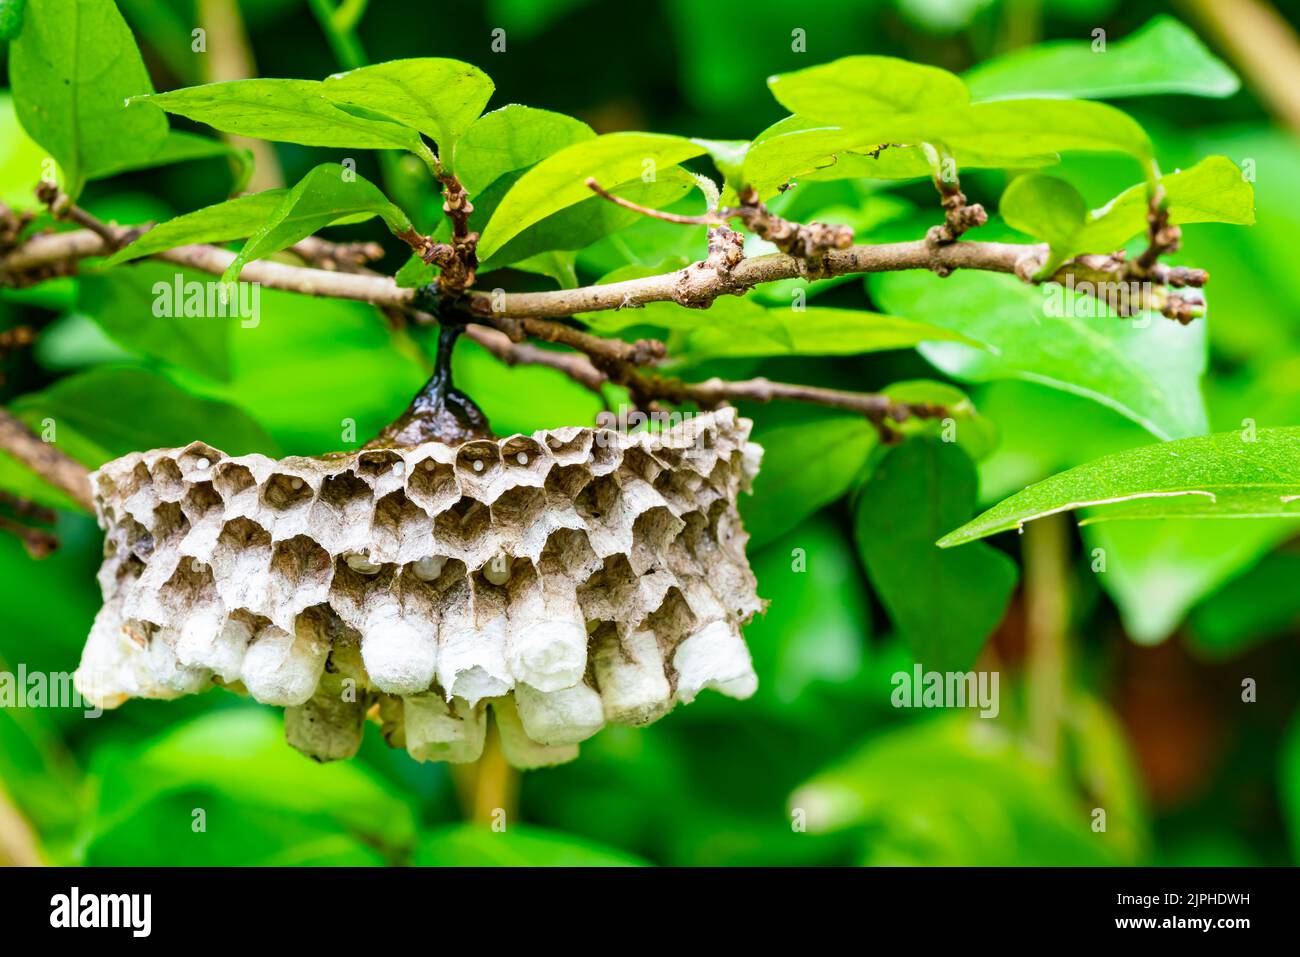 Side view of wasp nest with eggs and growing larva hanging on branches of a tree. Stock Photo